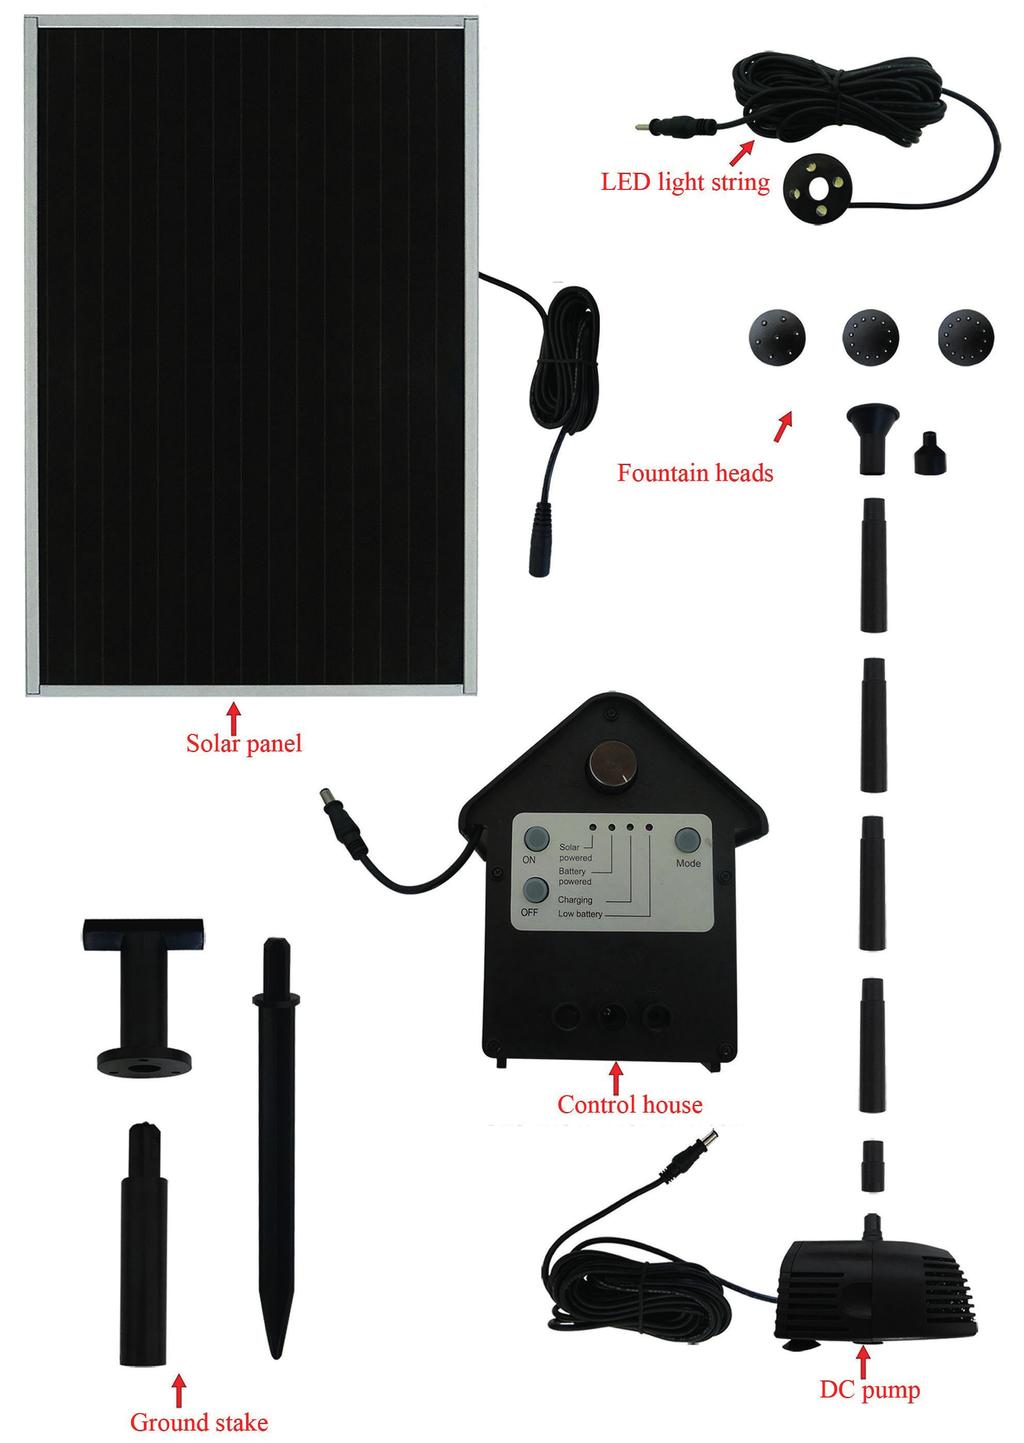 Technical Data Item # 10029901 10029902 Solar panel power 3W 5W Input voltage 6-9V DC 6-9V DC Water flow (max.) 250 l/h 400-500 l/h Water lift (max.) 1.2m 1.4m Projection height 0.6m 0.